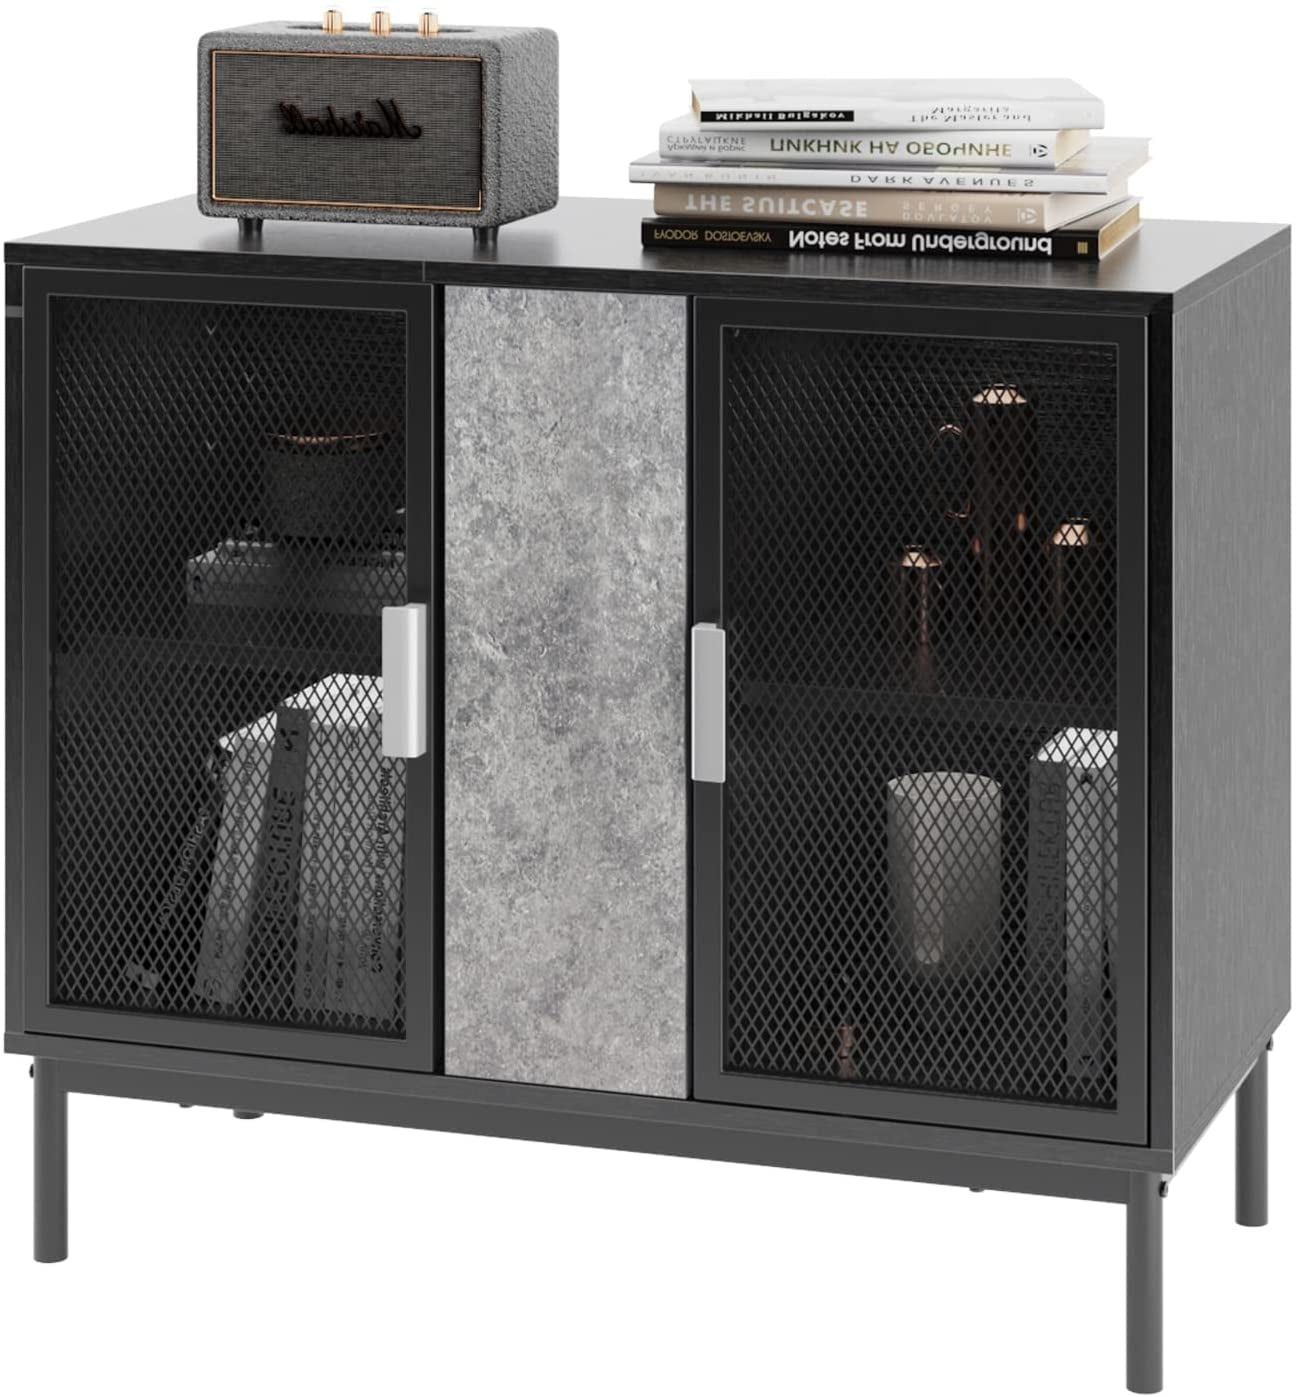 Sideboards With Breathable Mesh Doors Regarding Popular Soges Accent Storage Cabinet With 2 Metal Mesh Doors,  (View 4 of 15)